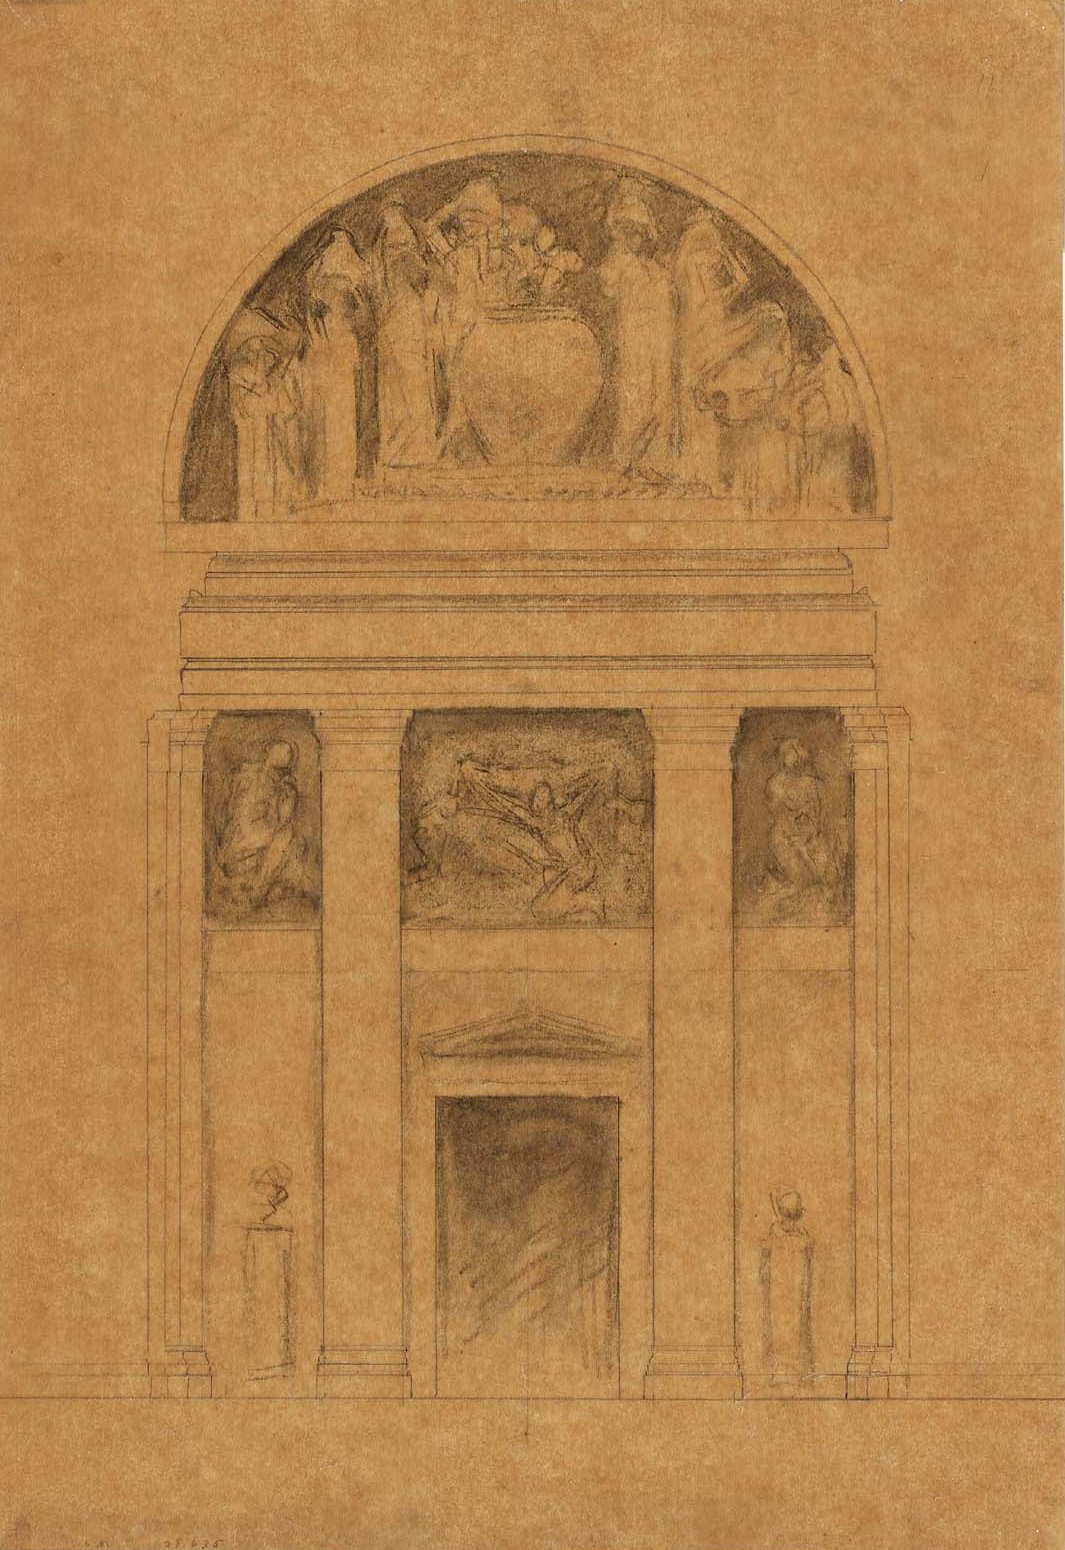 John Singer Sargent. Sketch for a fresco above the door of the library